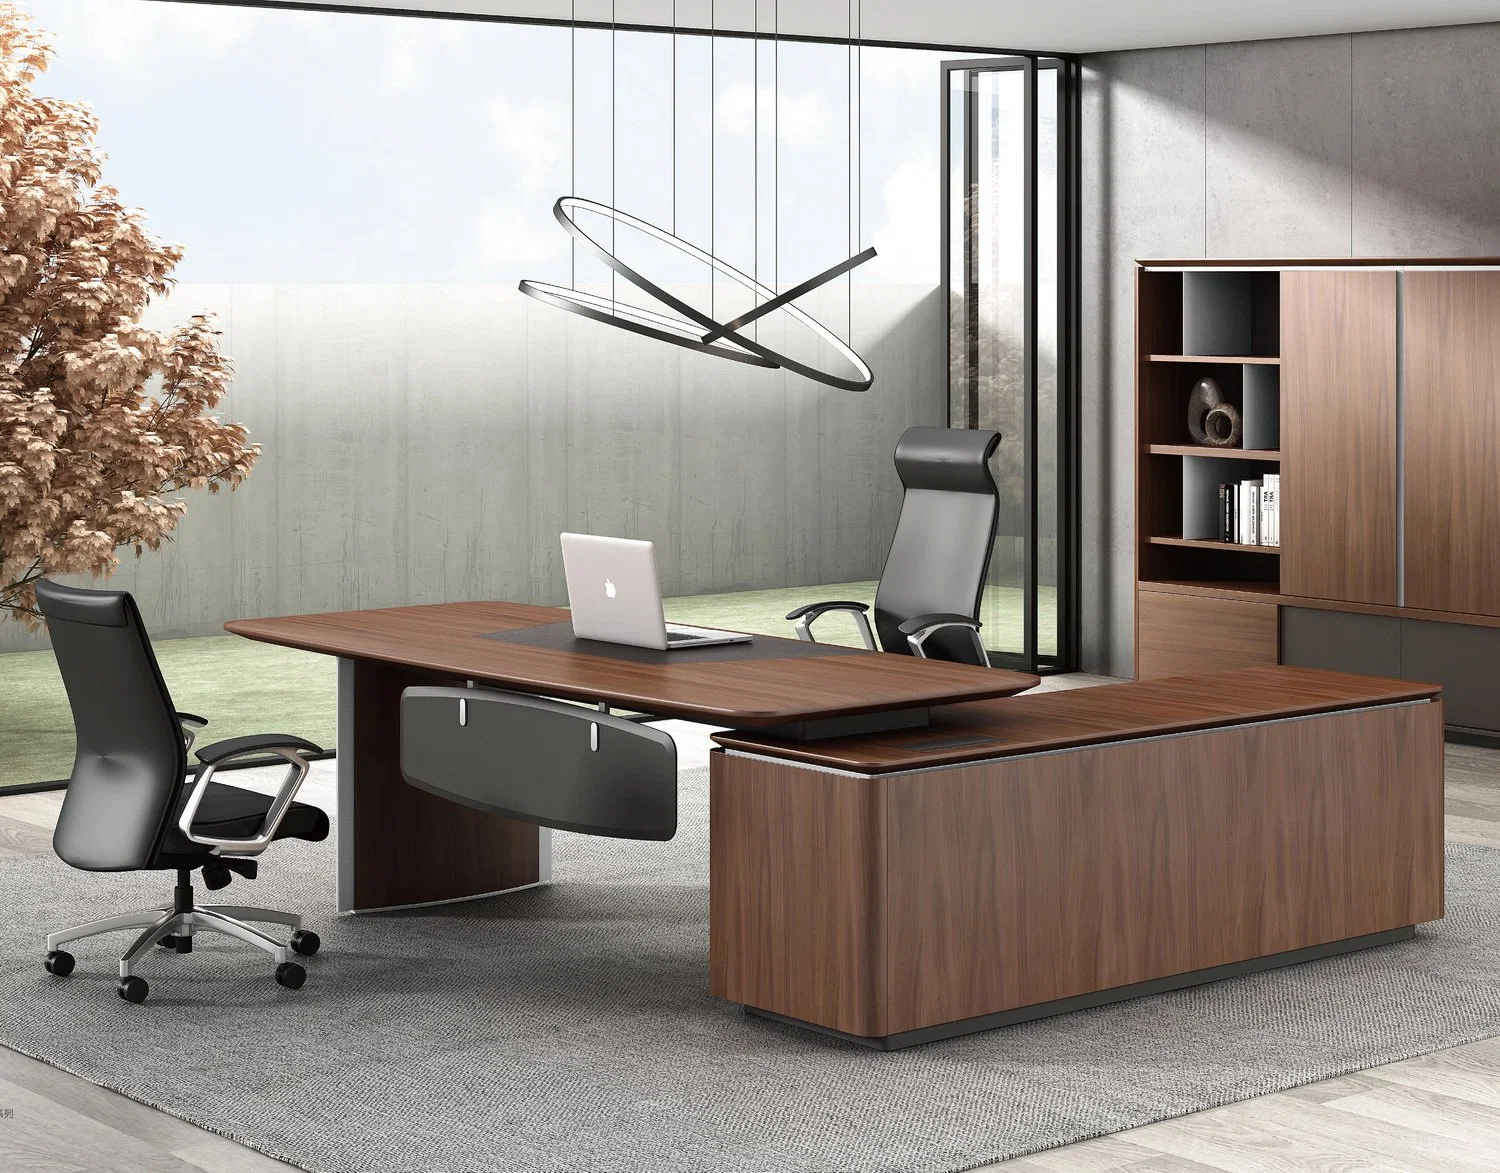 High Quality Modern Wooden Office Furniture Business Fashion Corner Desk Director Manager Boss Executive Table